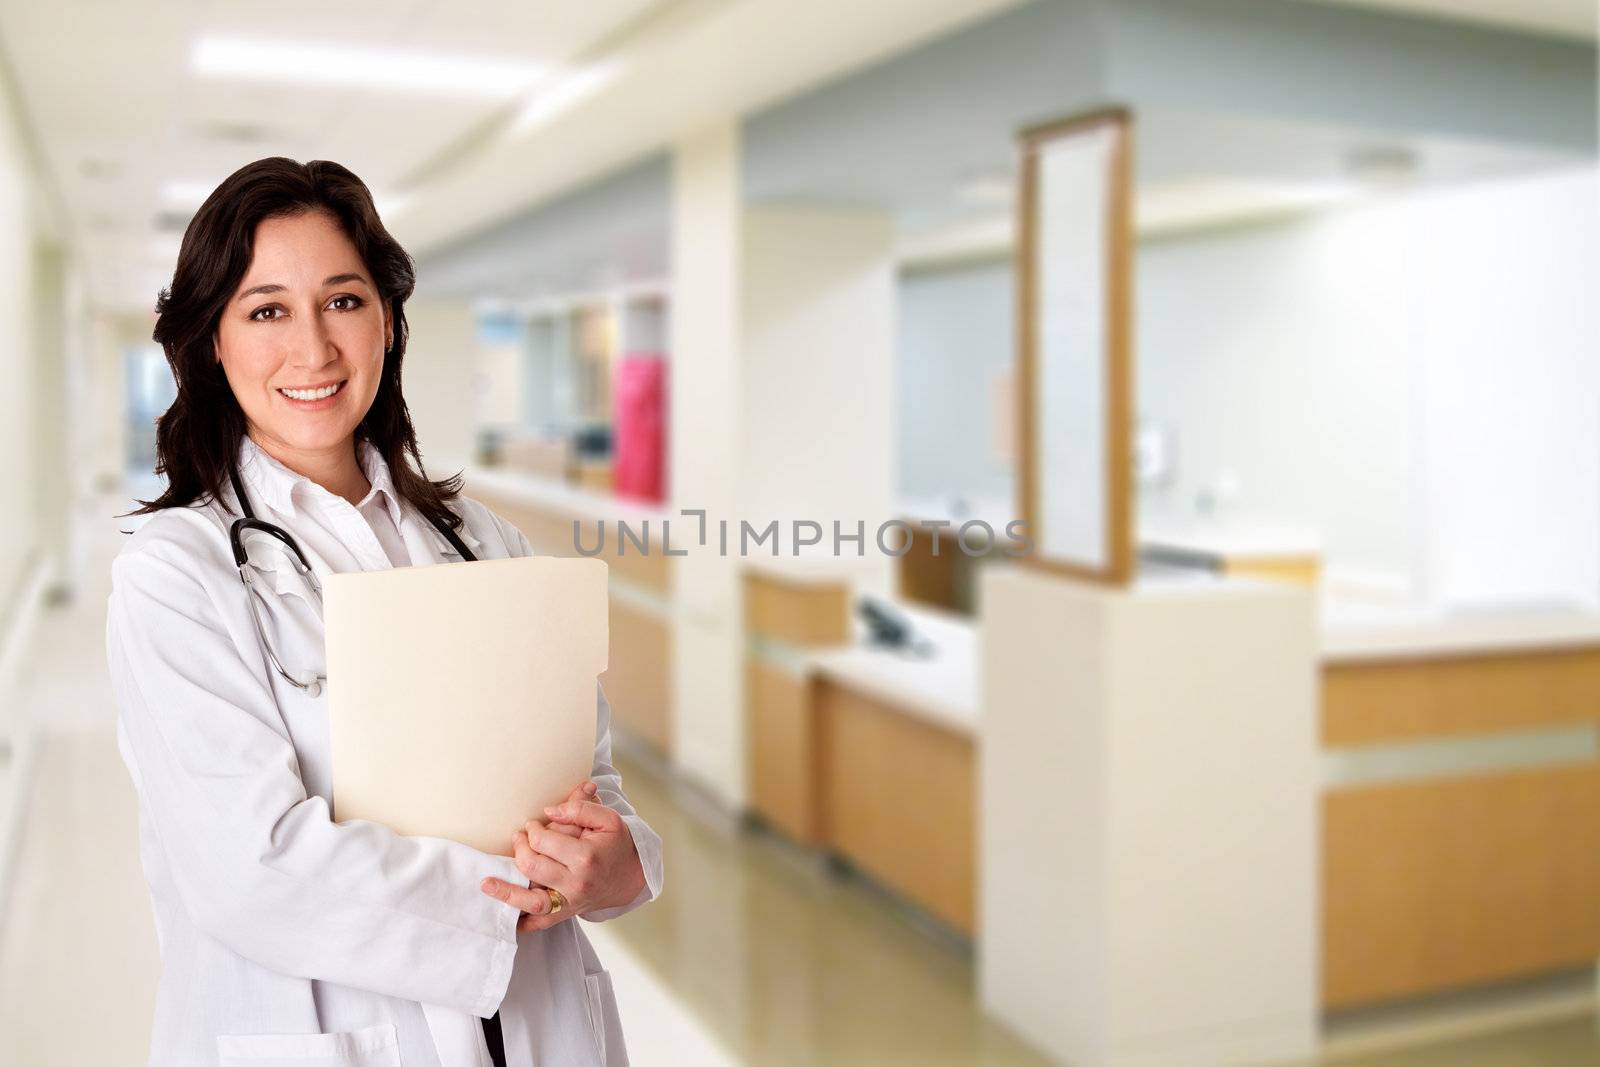 Attractive female doctor with white coat and stethoscope standing holding a patient file chart dossier in corridor hallway at hospital clinic with nursestation desk.